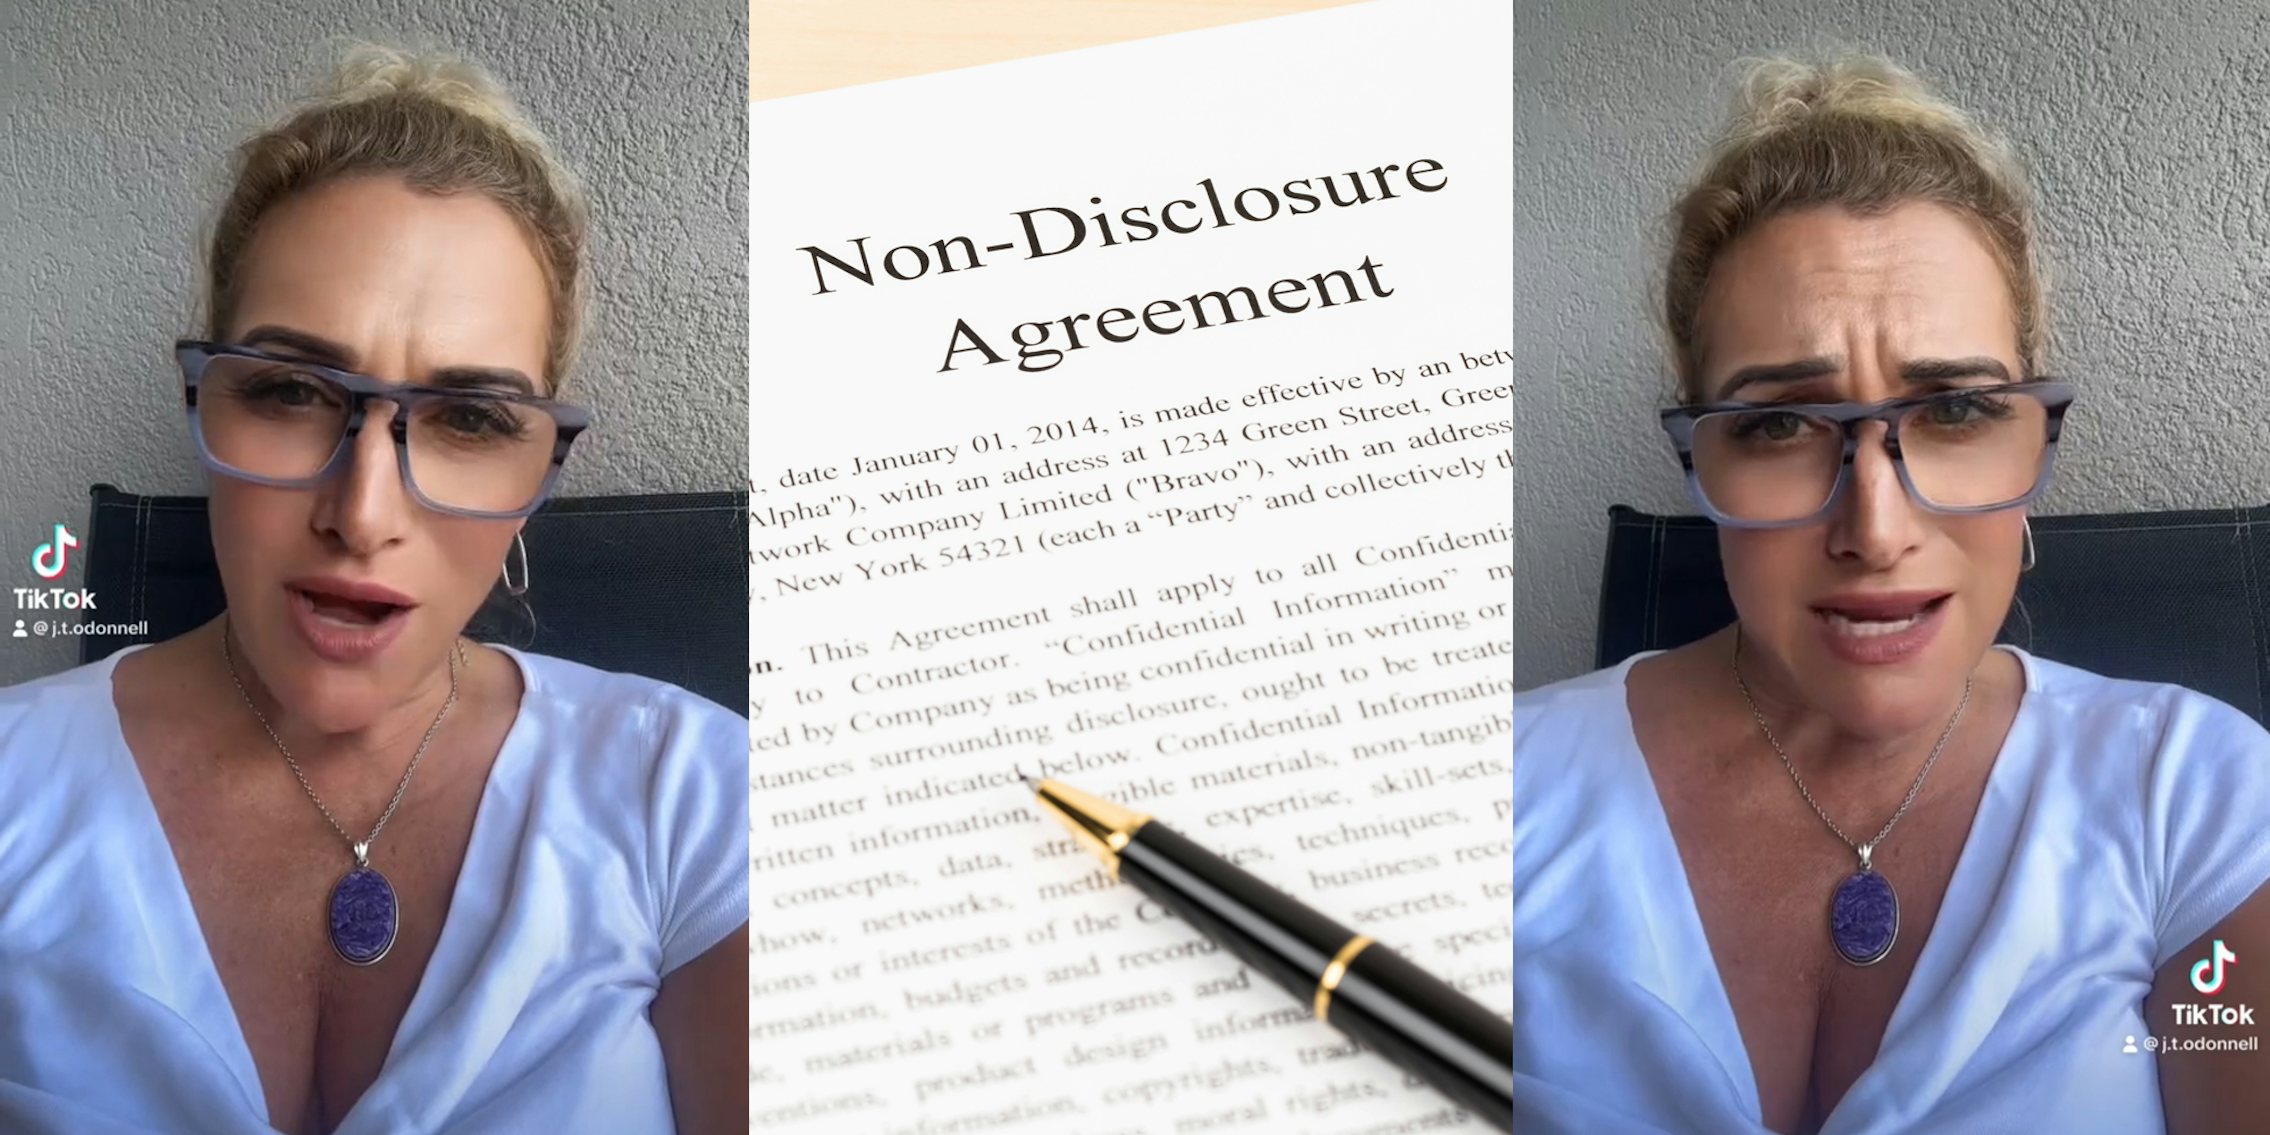 life coach speaking in chair (l) Non-Disclosure Agreement paper on table with pen (c) life coach speaking in chair (r)